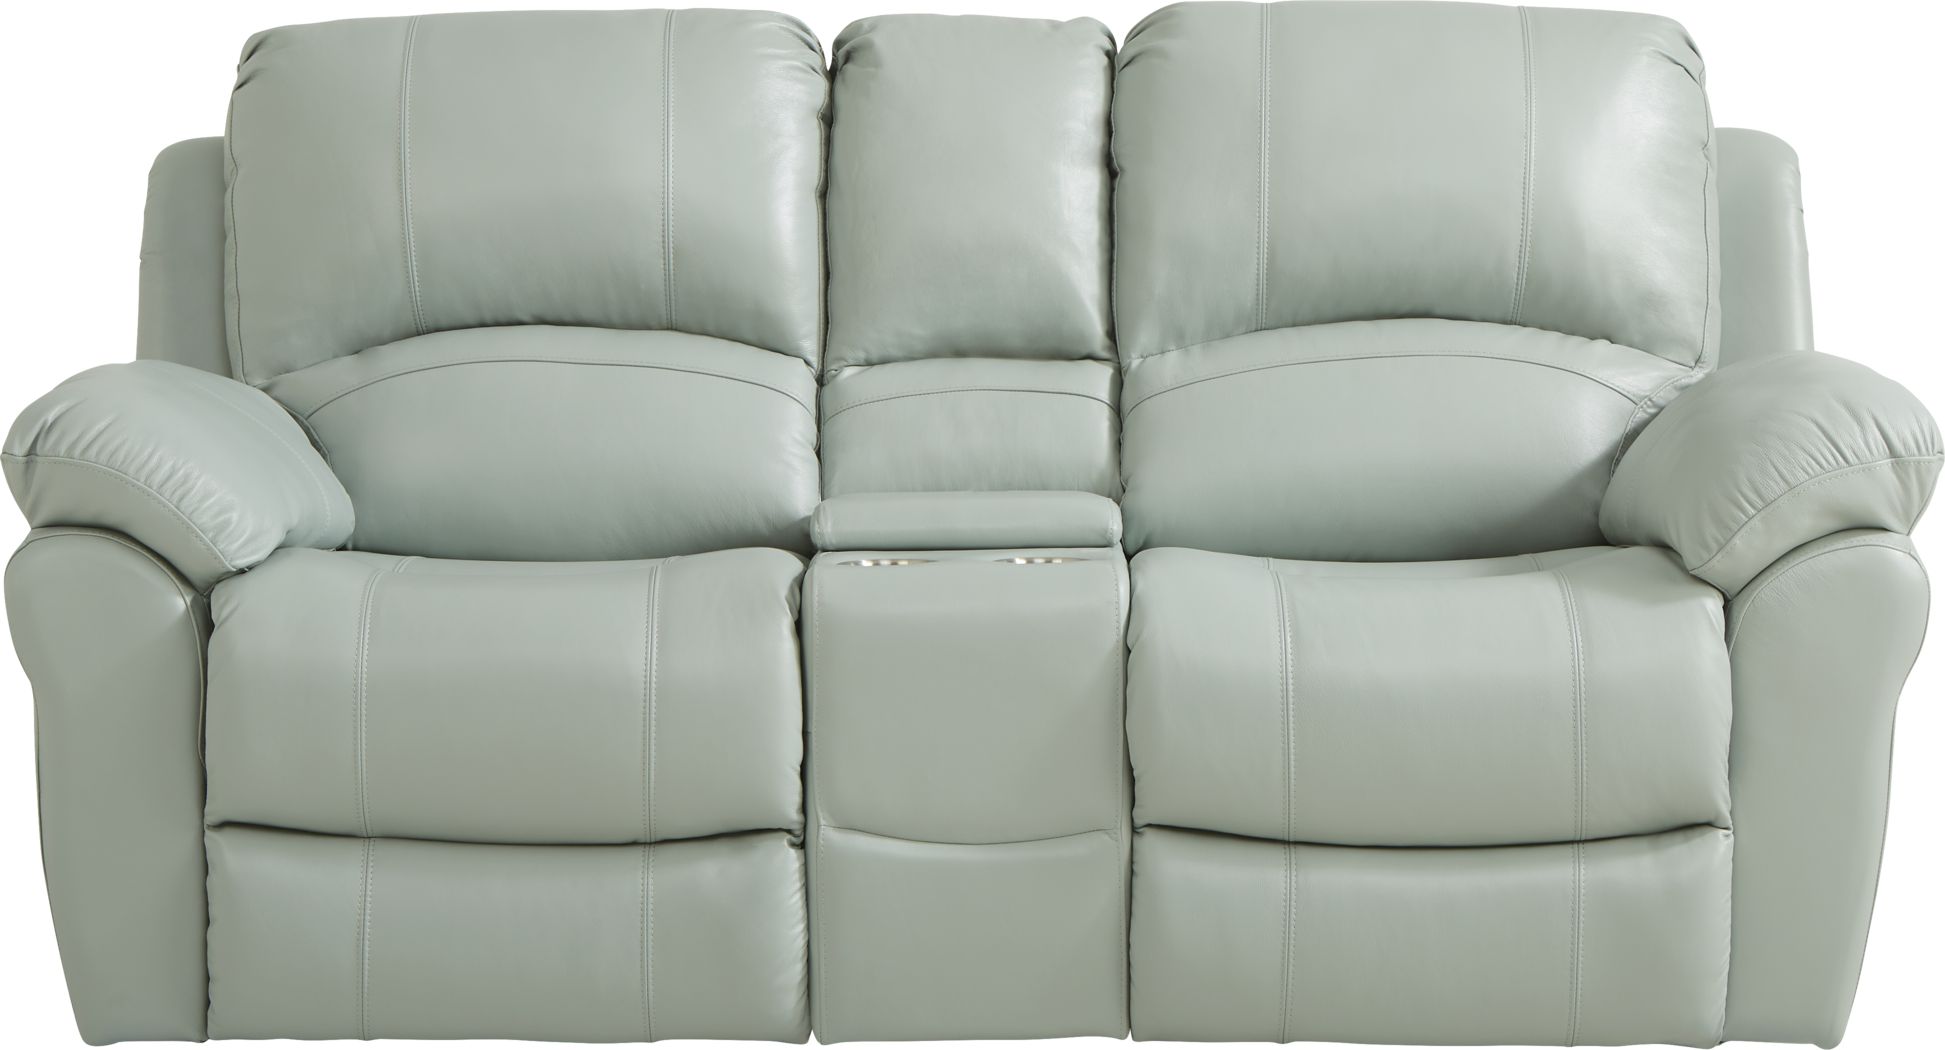 Leather Loveseats For Reclining, Black Leather Loveseat Recliner With Console